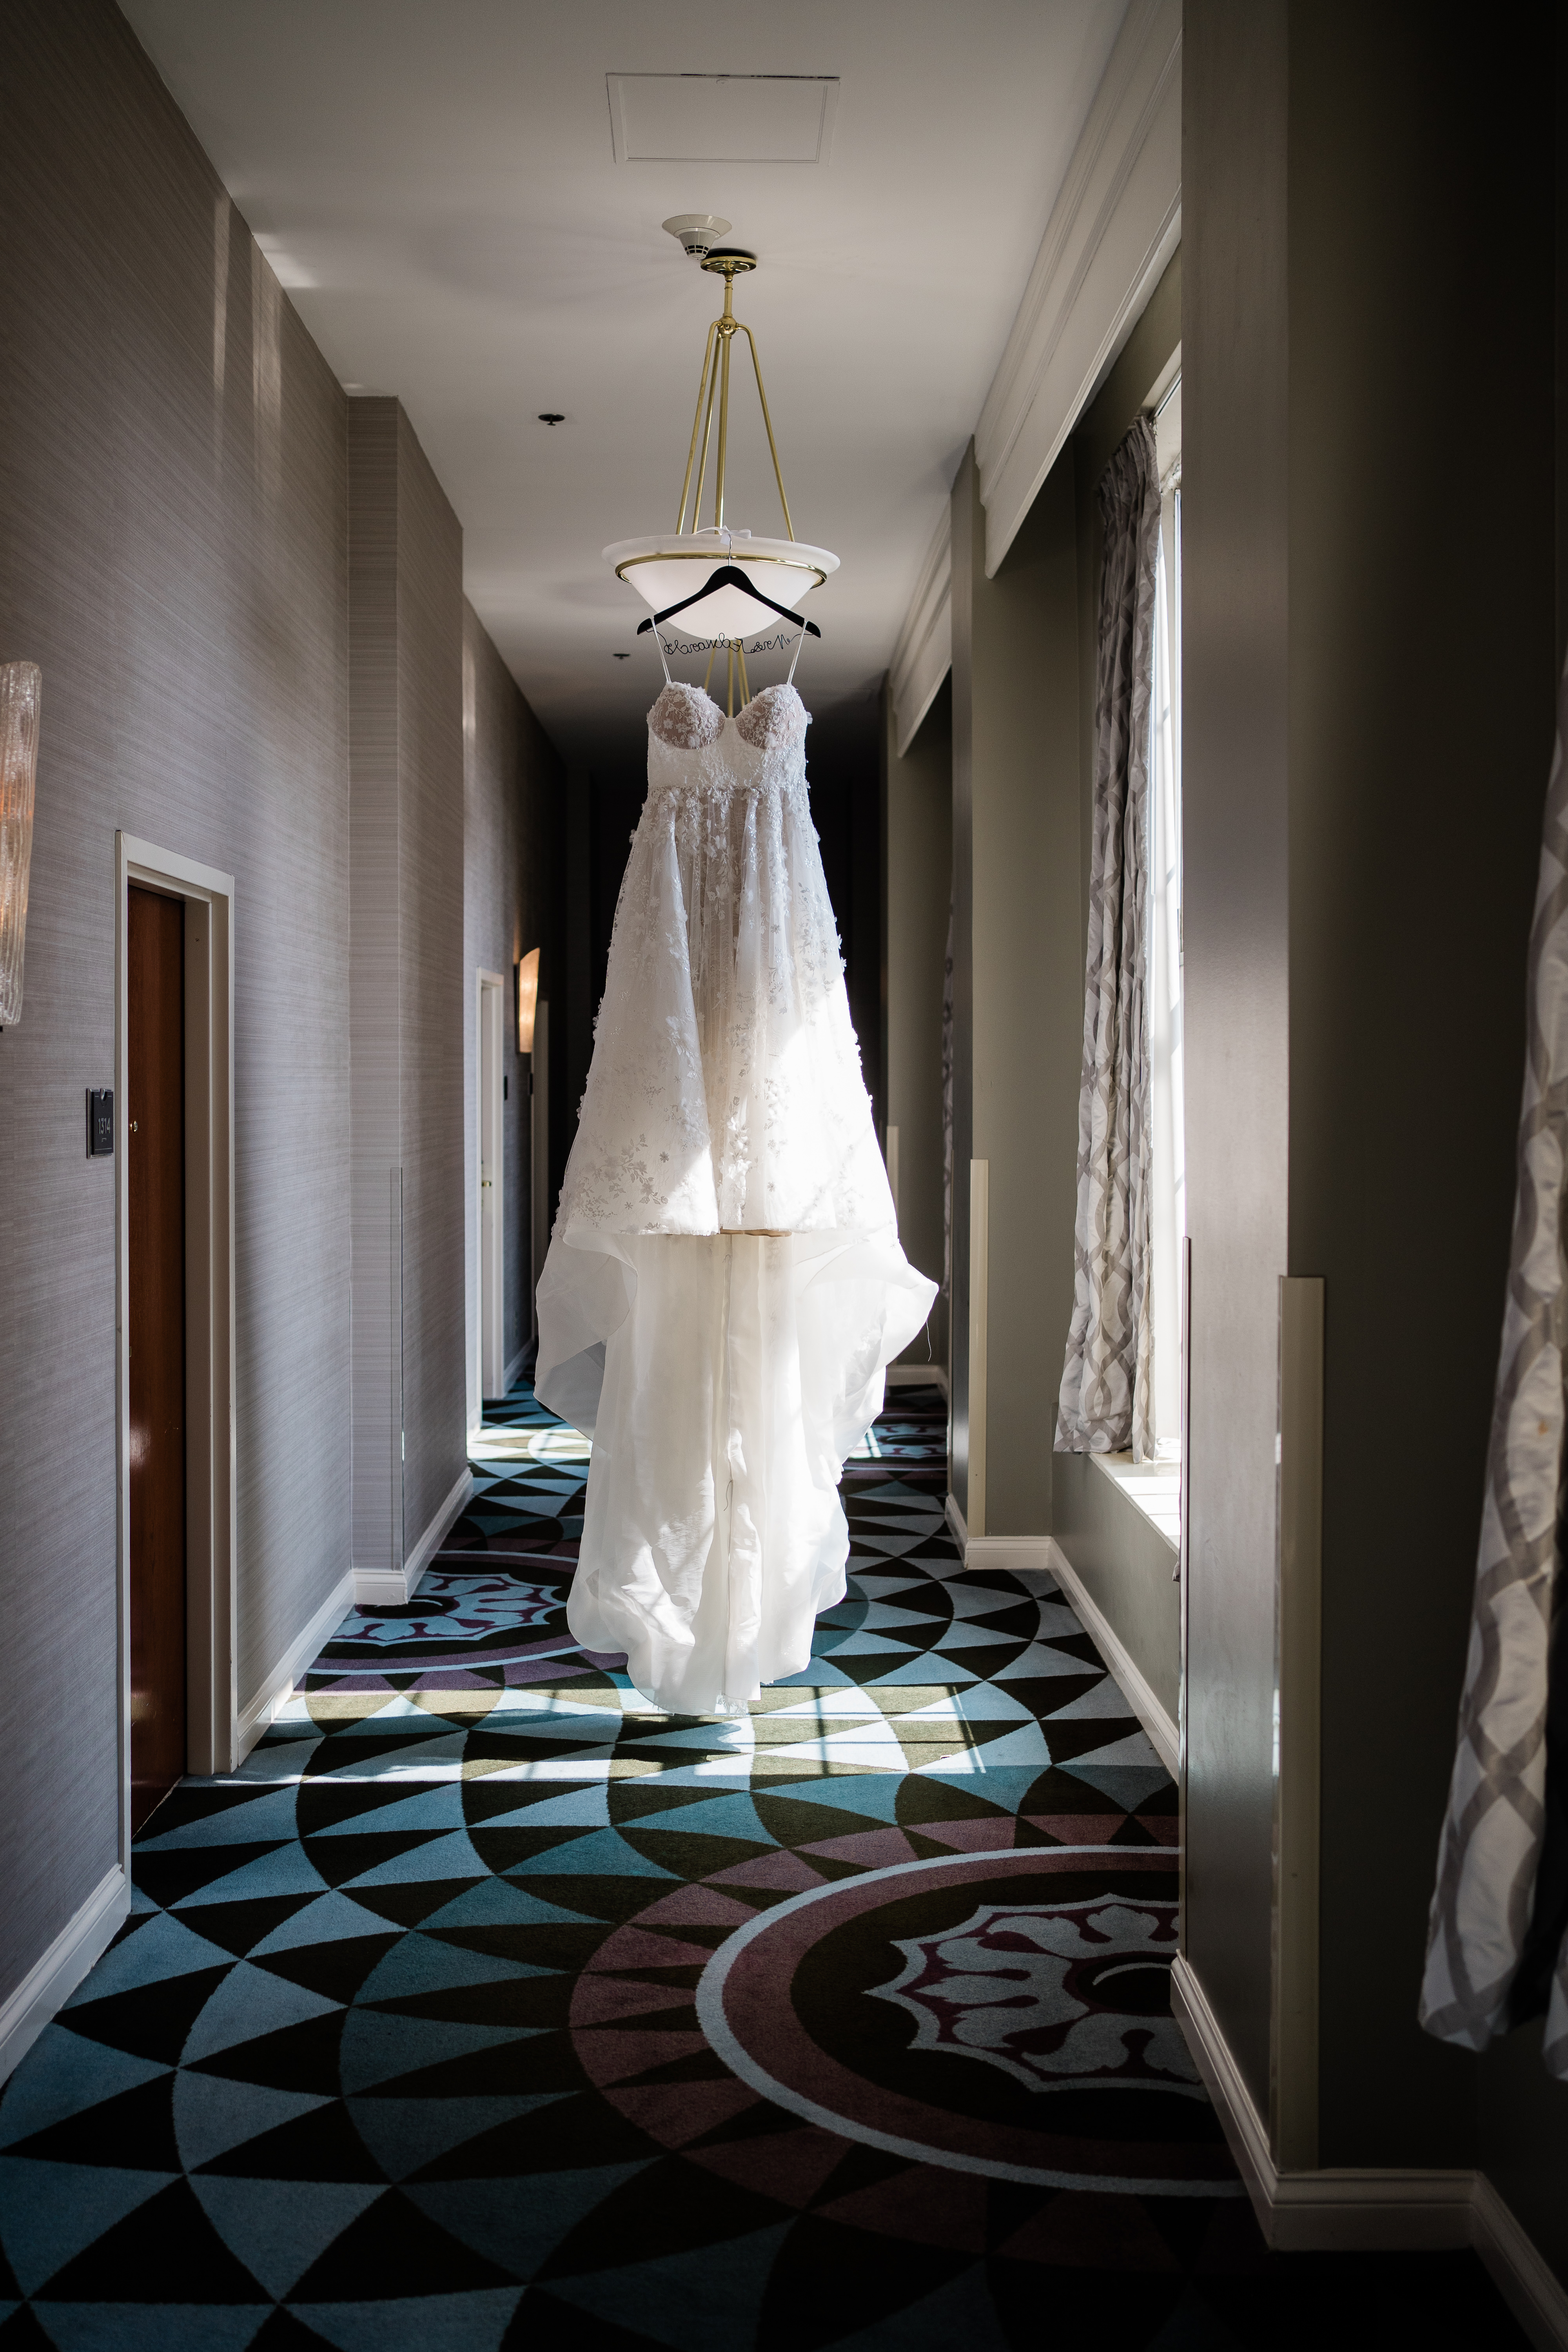 brides dress hanging in a hallway at the wedding venue for a downtown wedding taken by Fort Wayne wedding photographers